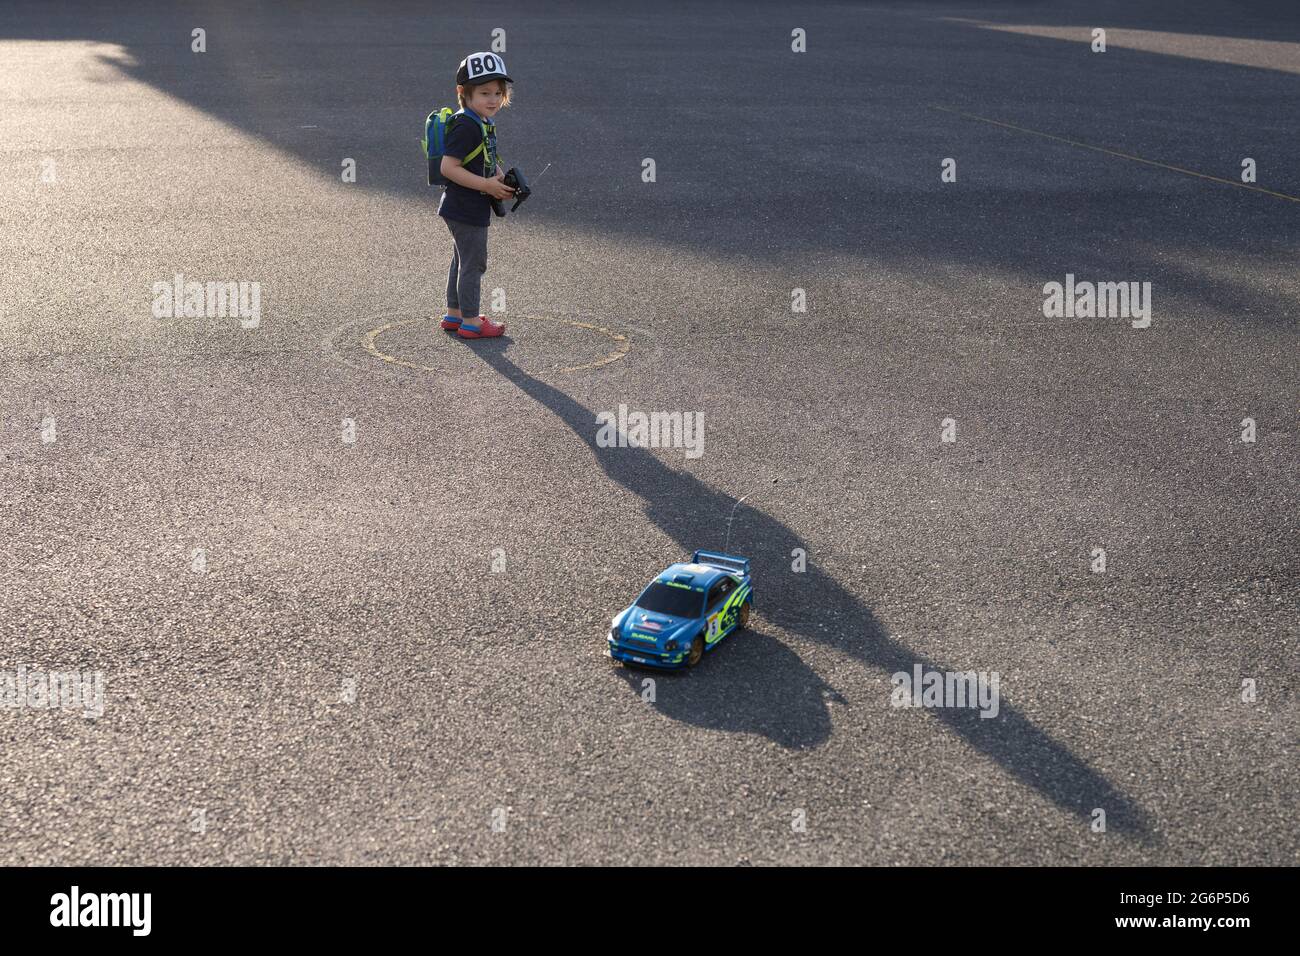 A child playing with a radio control car Stock Photo